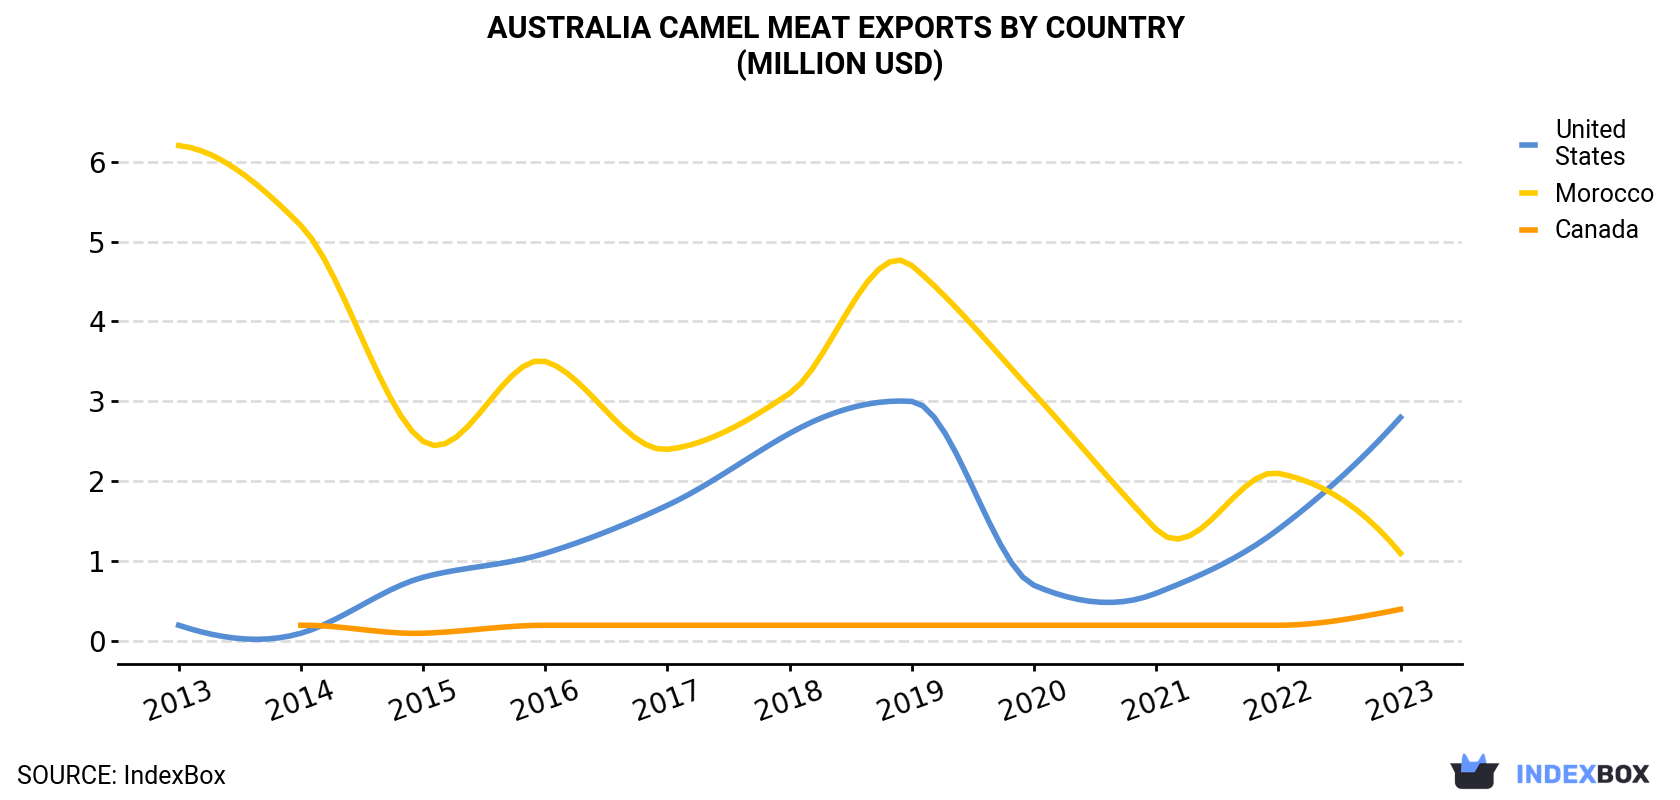 Australia Camel Meat Exports By Country (Million USD)